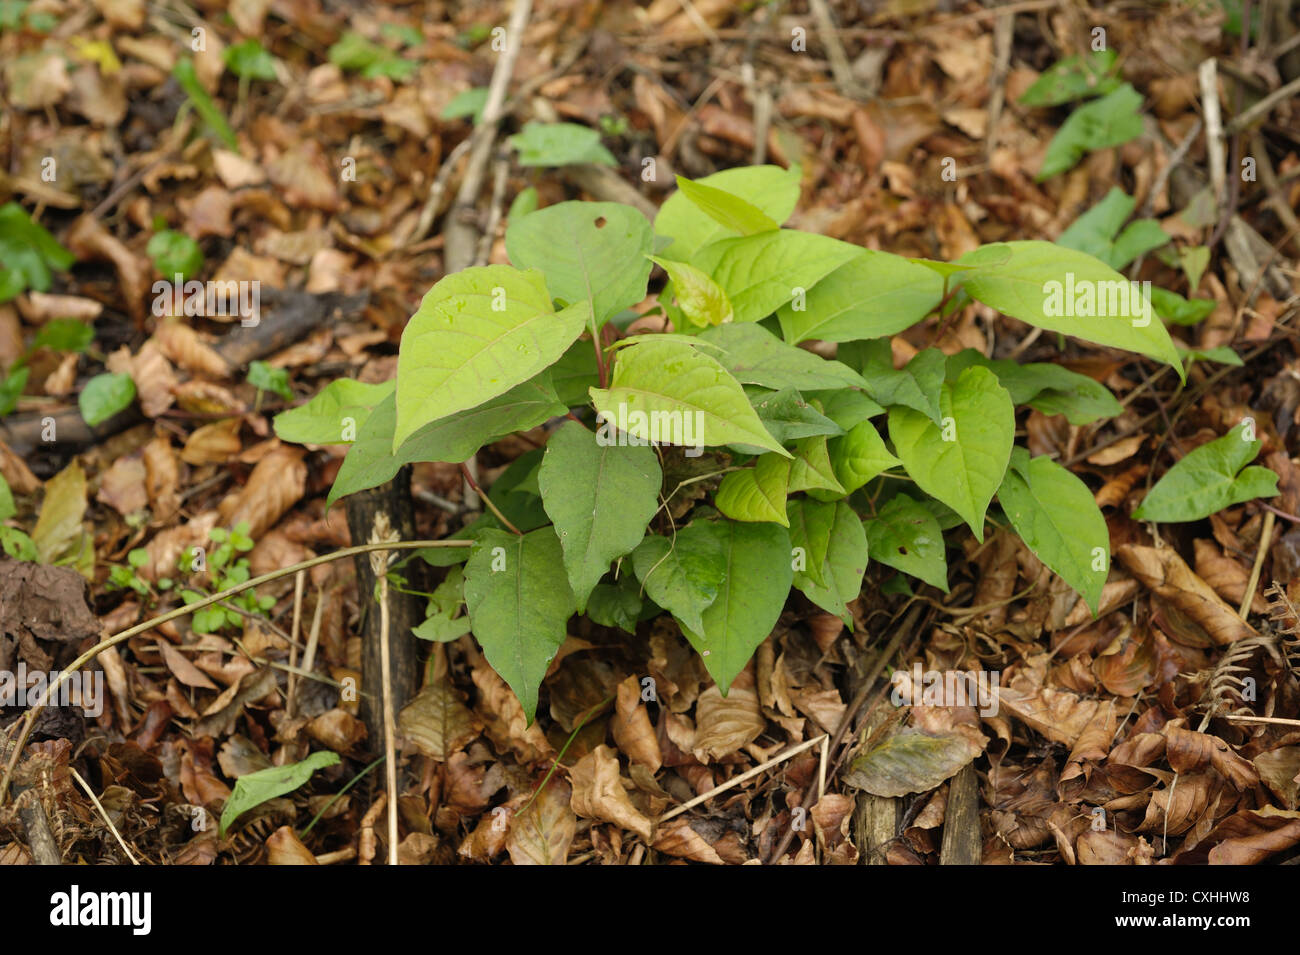 Japanese knotweed (Reynoutria japonica) regrowth of plants after herbicide application Stock Photo